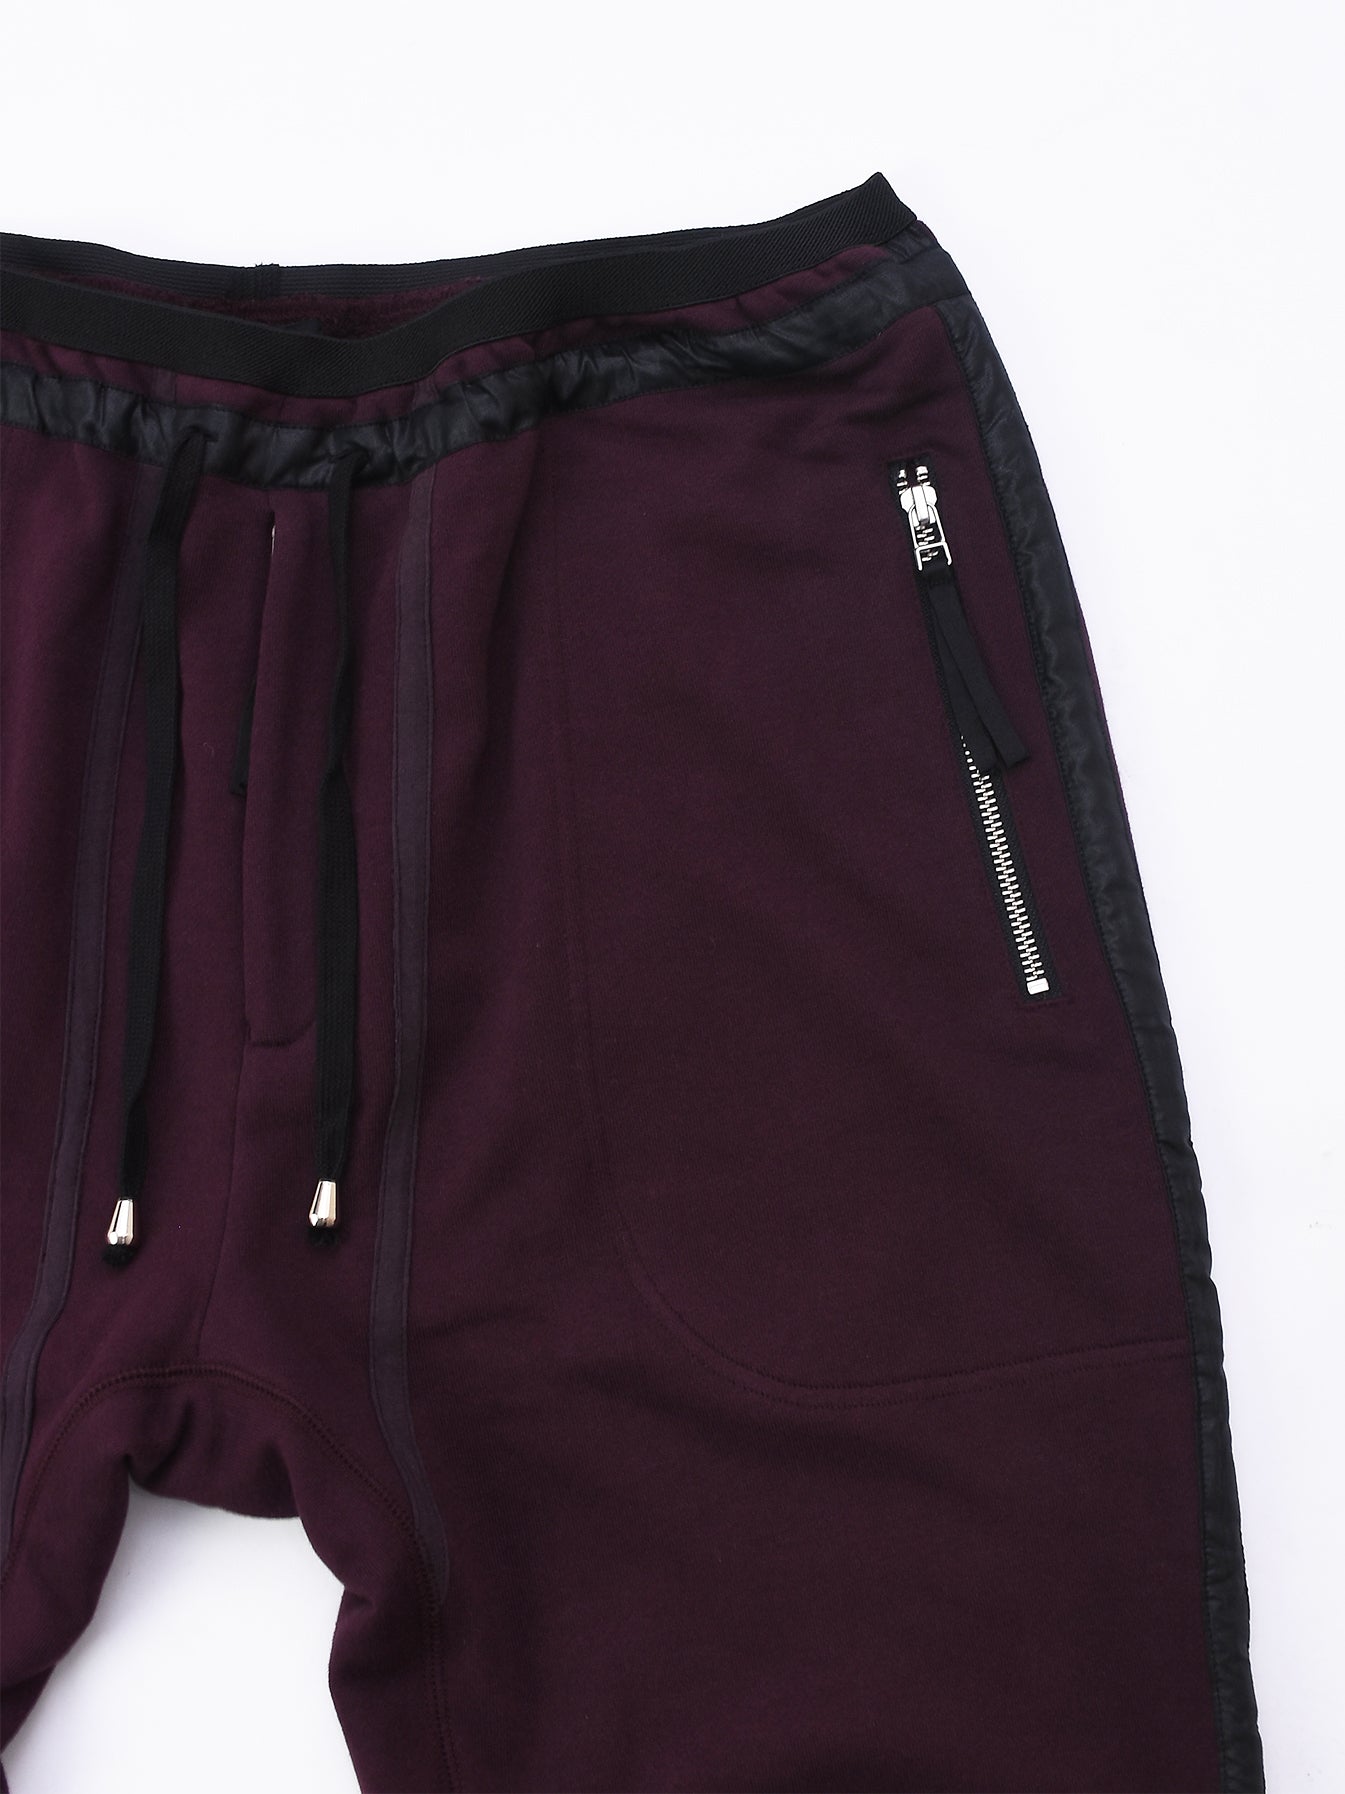 BURGUNDY AND BLACK SATIN STRIPED JOGGERS